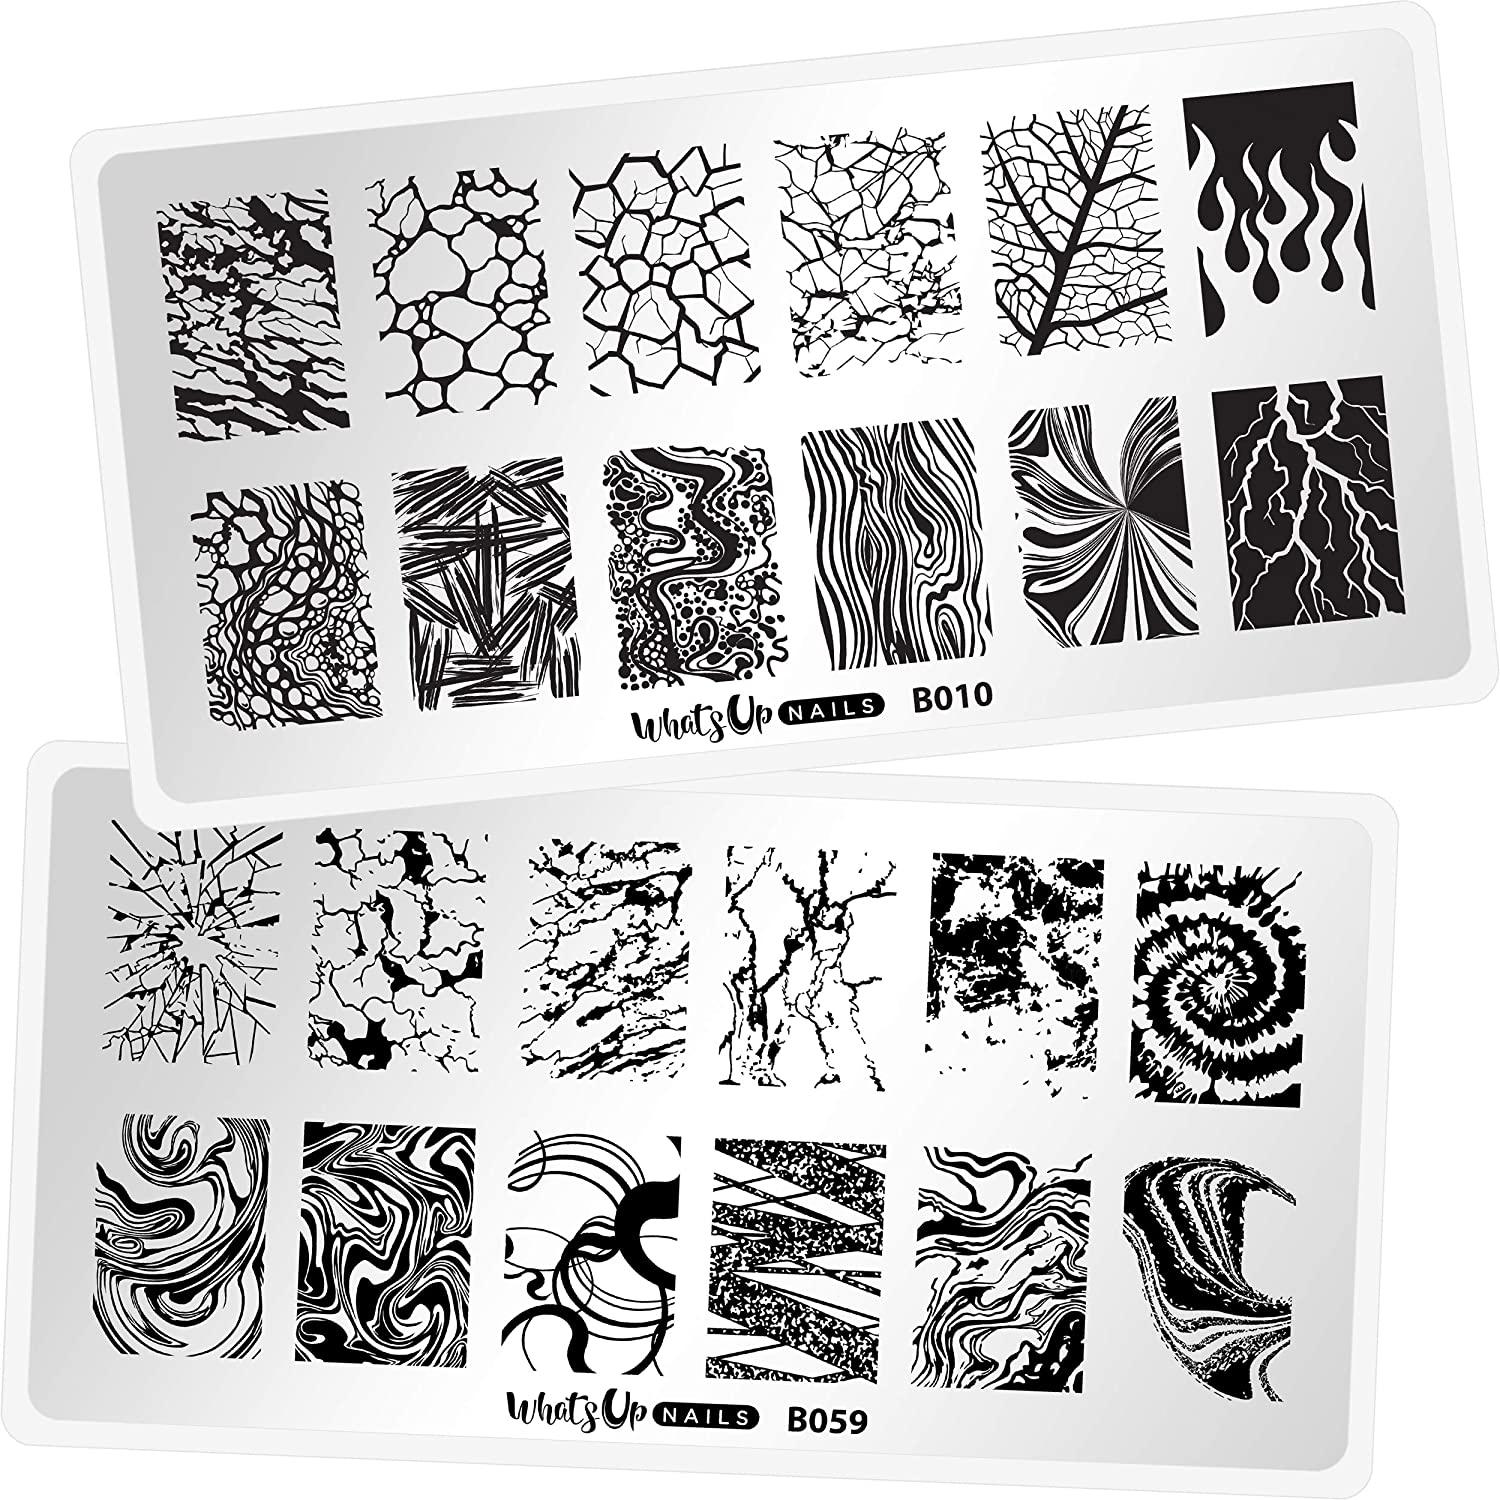 Whats Up Nails - Texture Stamping Plates 2 pack (B010, B059) for Nail Art  Design 2 plates (B010, B059)